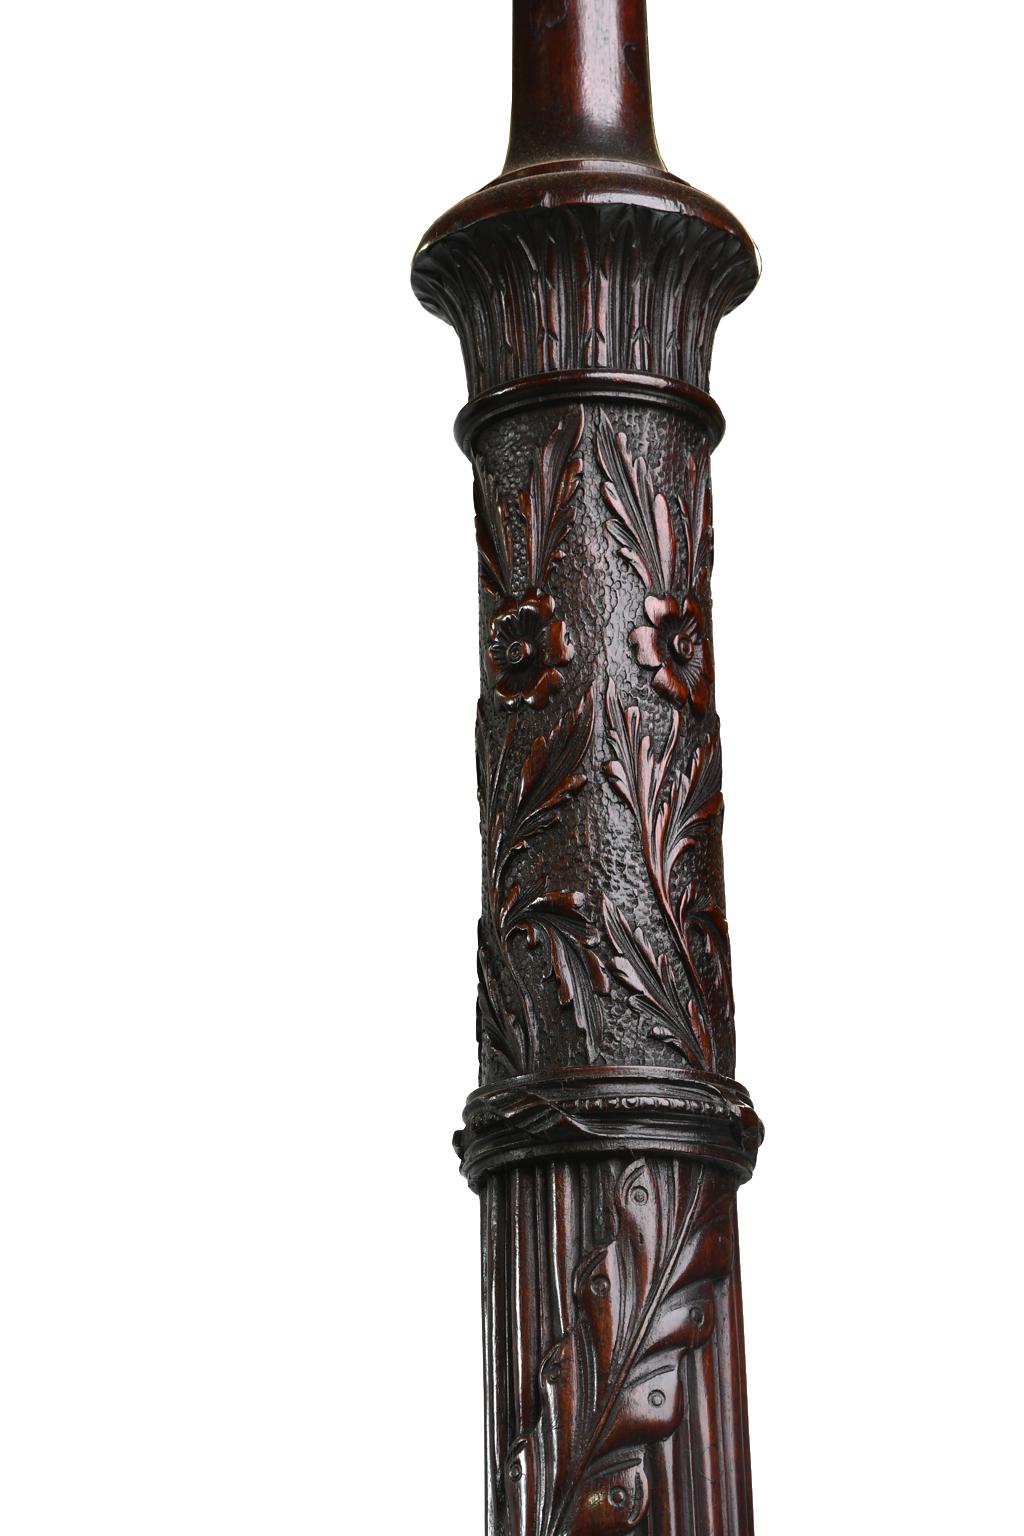 NYC Federal Full Tester Bed Attributable to Lannuier w Four Floral-Carved Posts For Sale 4